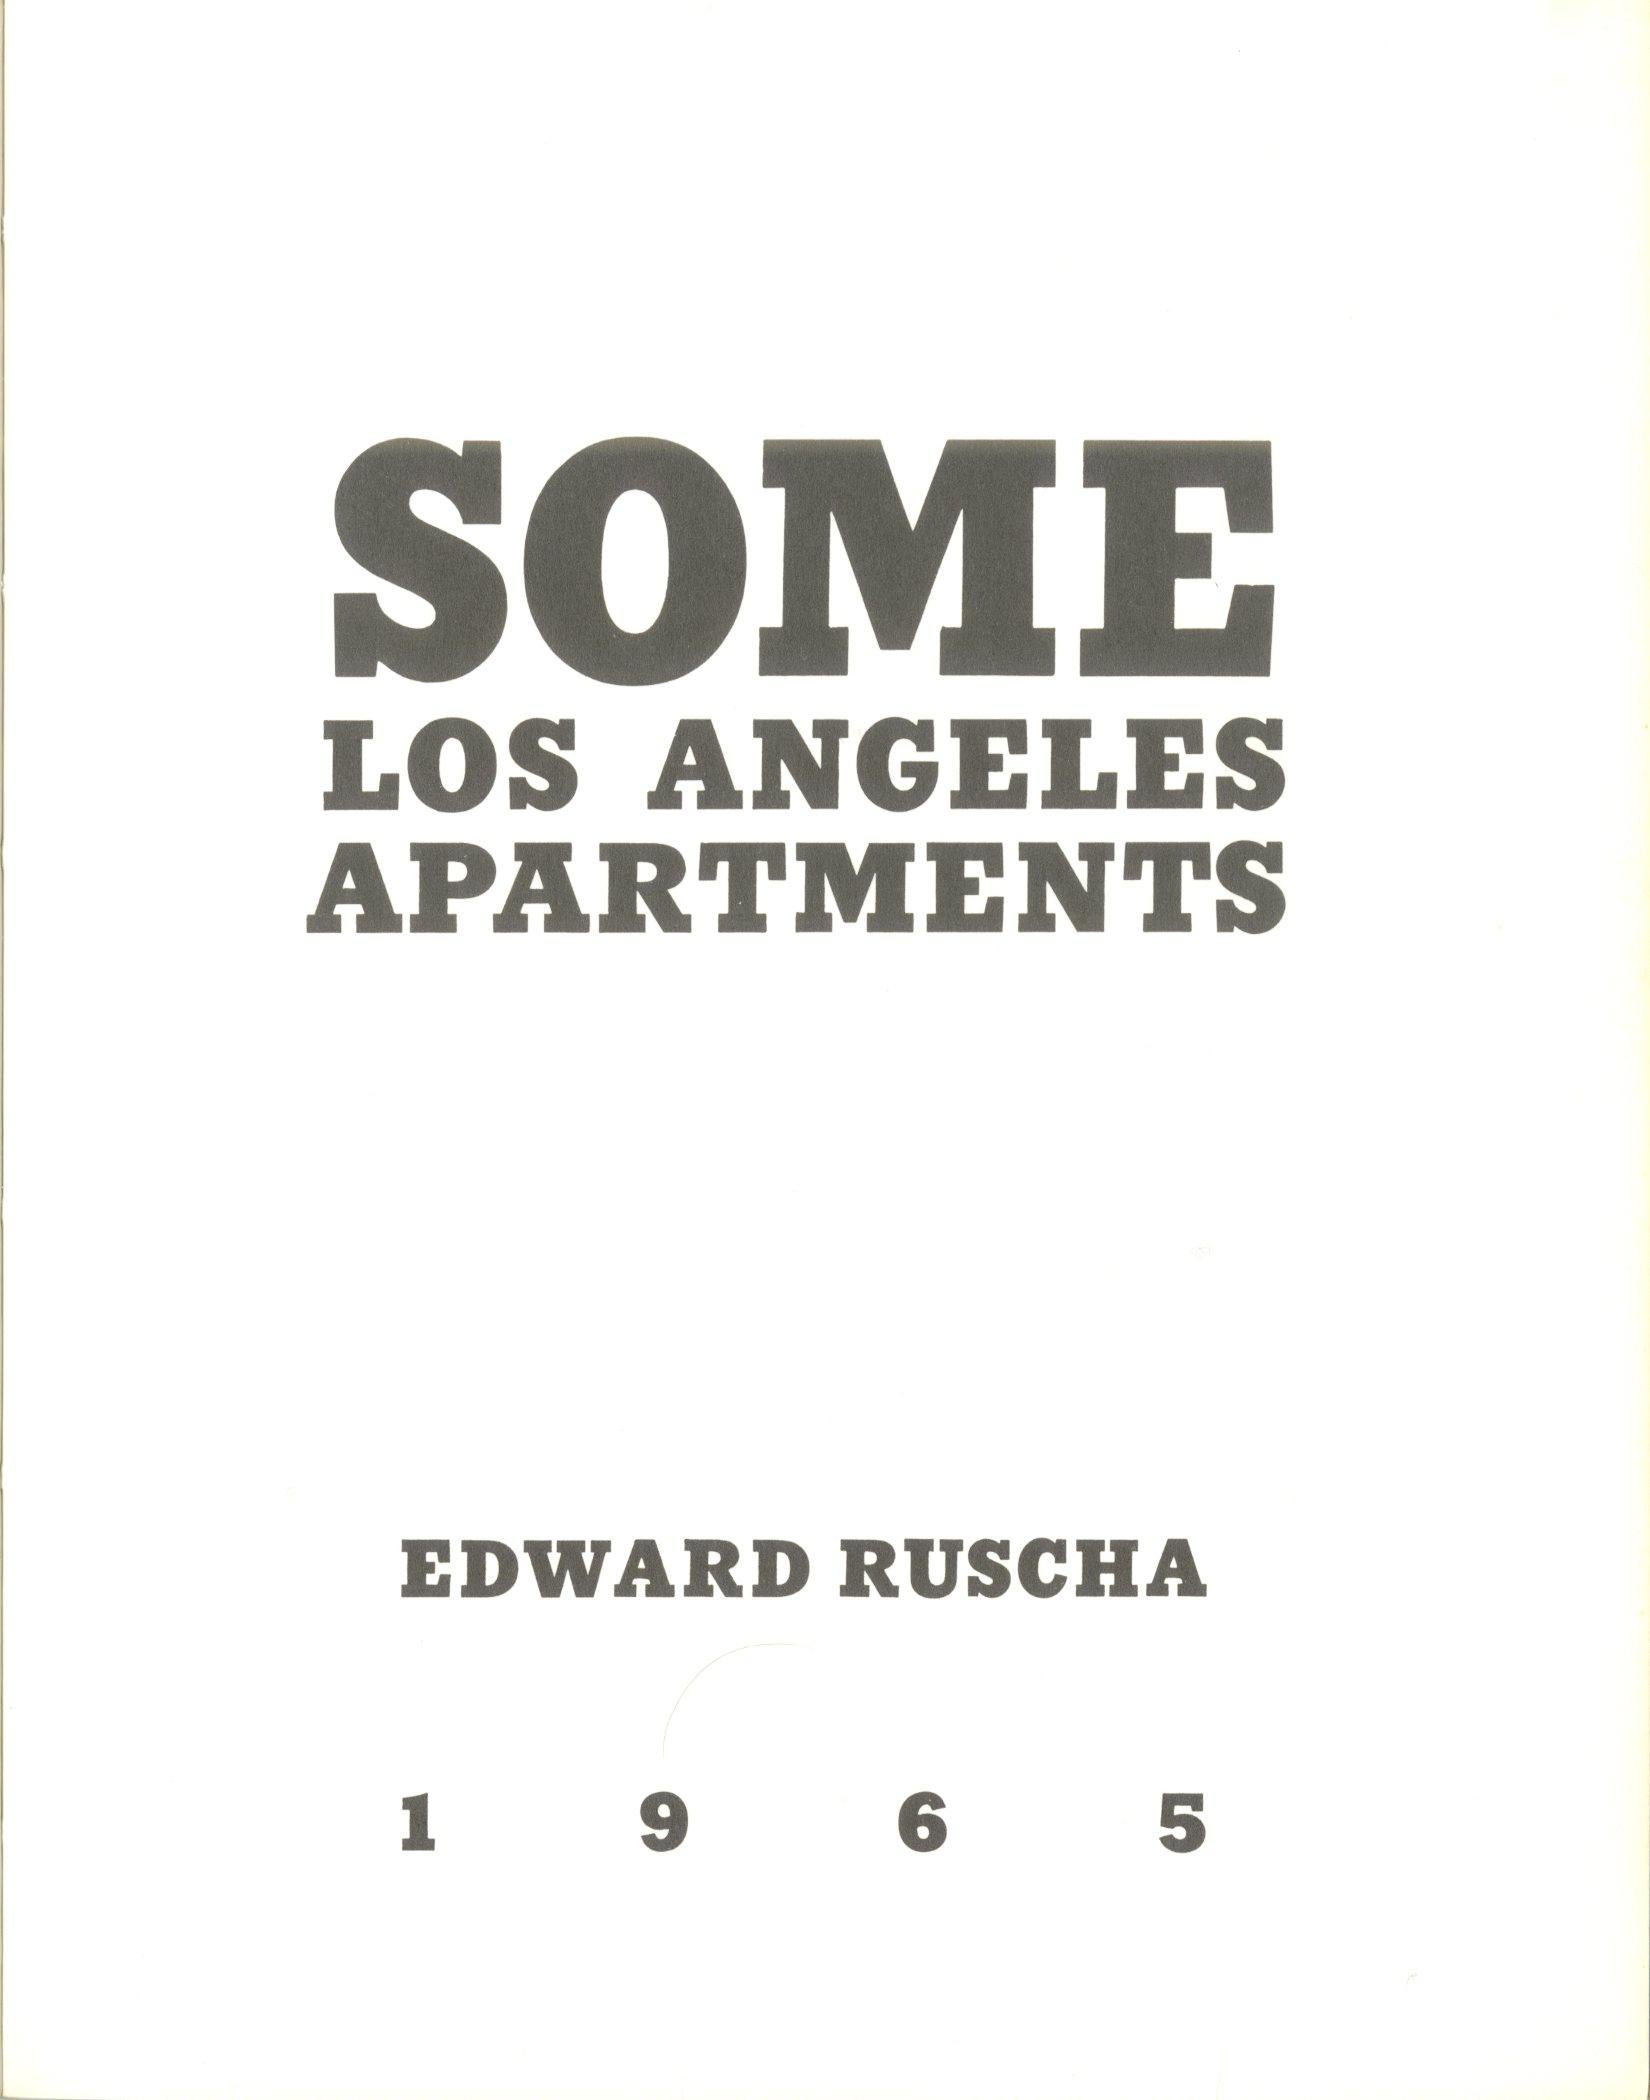 Some Los Angeles Apartments - True, Stated 1st Edition of only 700 Artist Book - Pop Art Print by Ed Ruscha